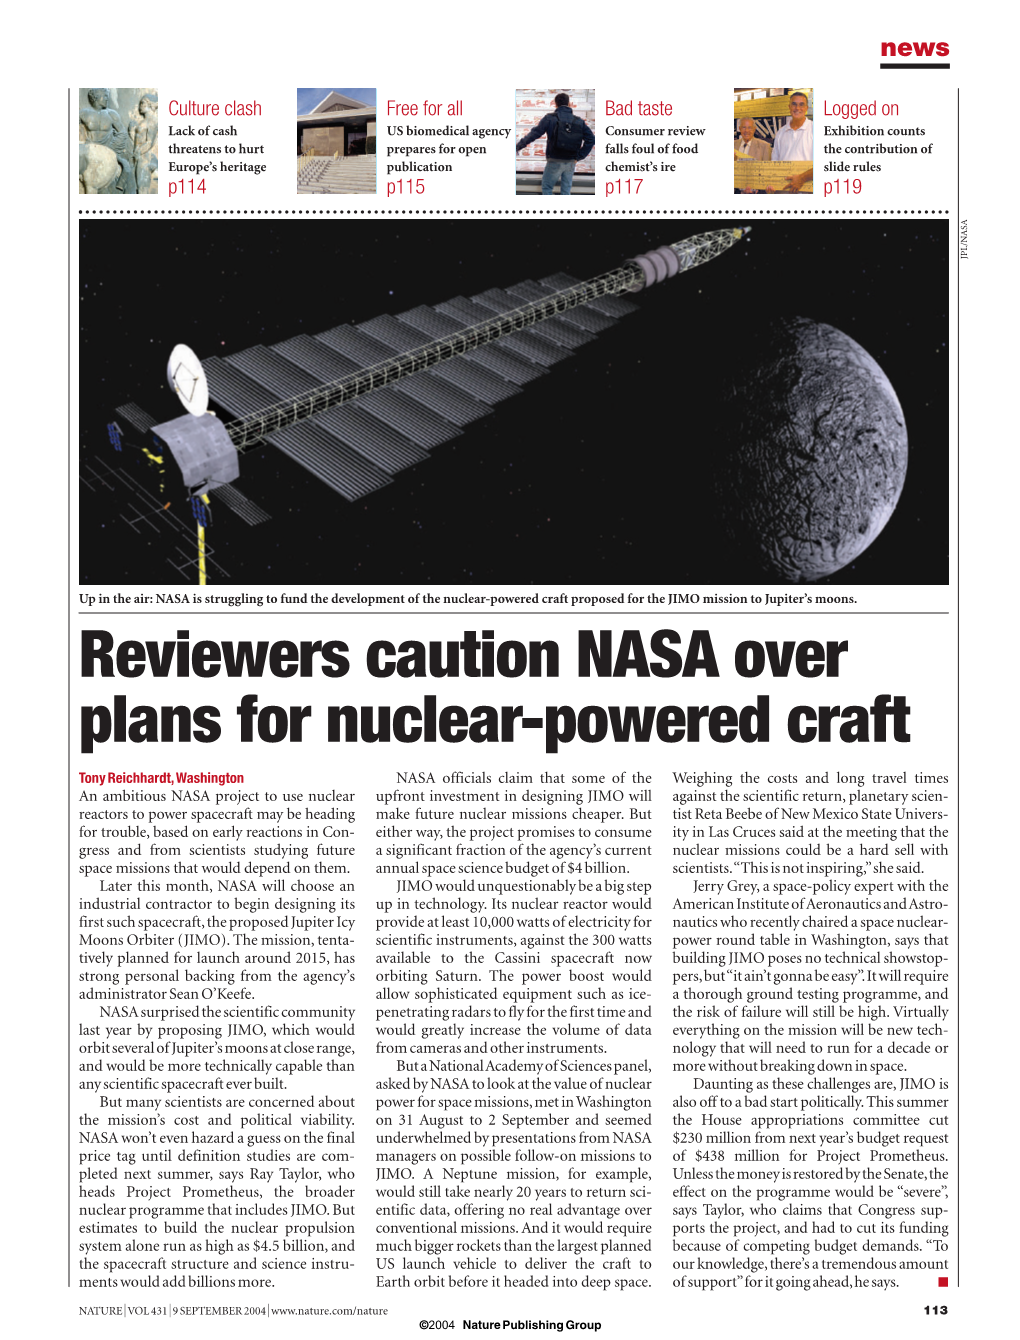 Reviewers Caution NASA Over Plans for Nuclear-Powered Craft